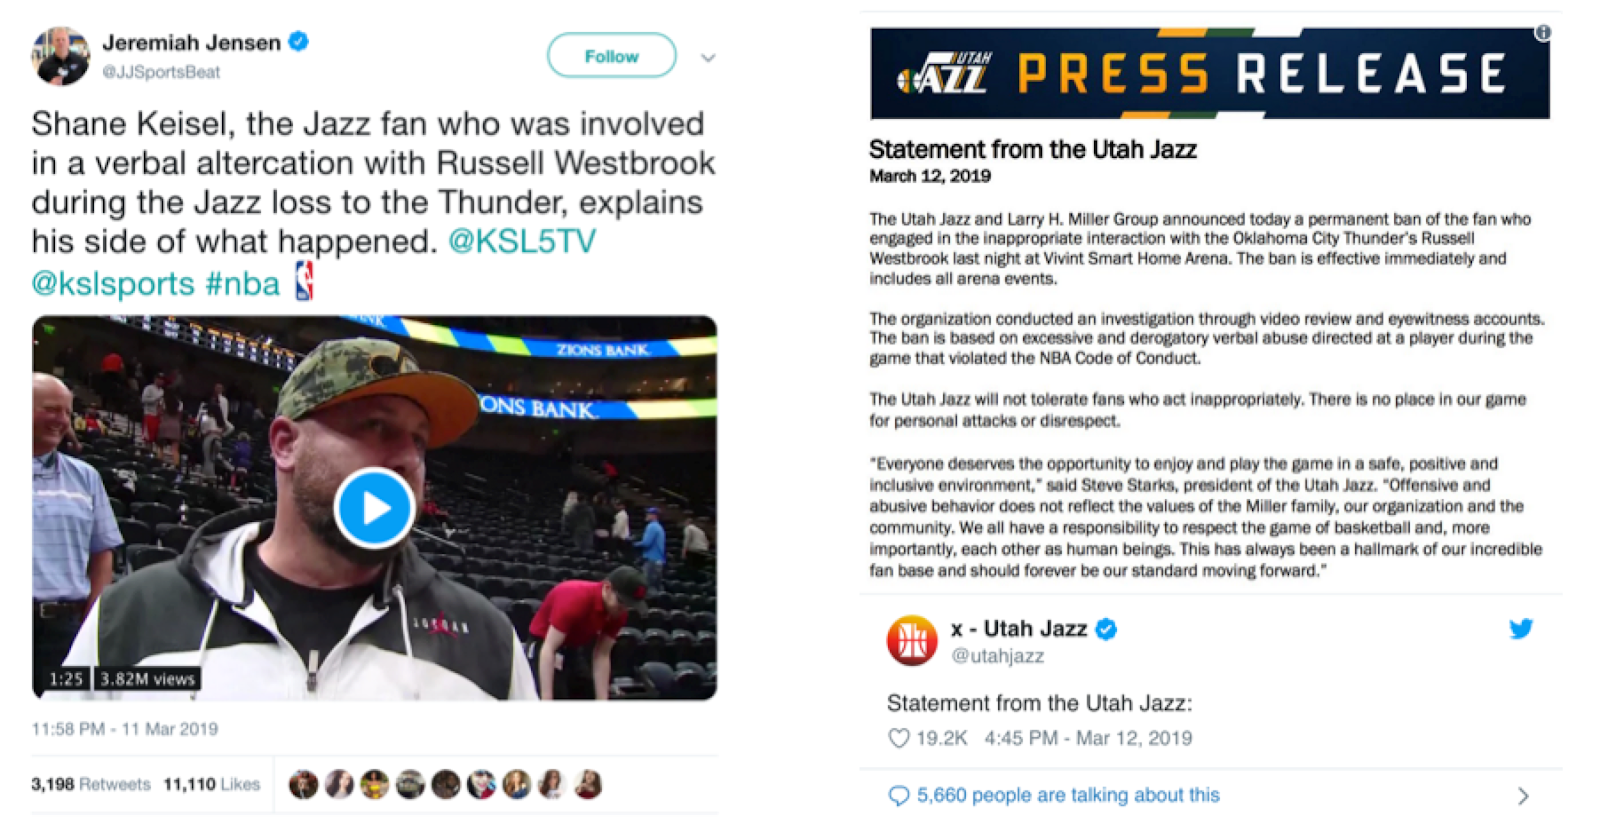 Westbrook has verbal altercation with Jazz fans